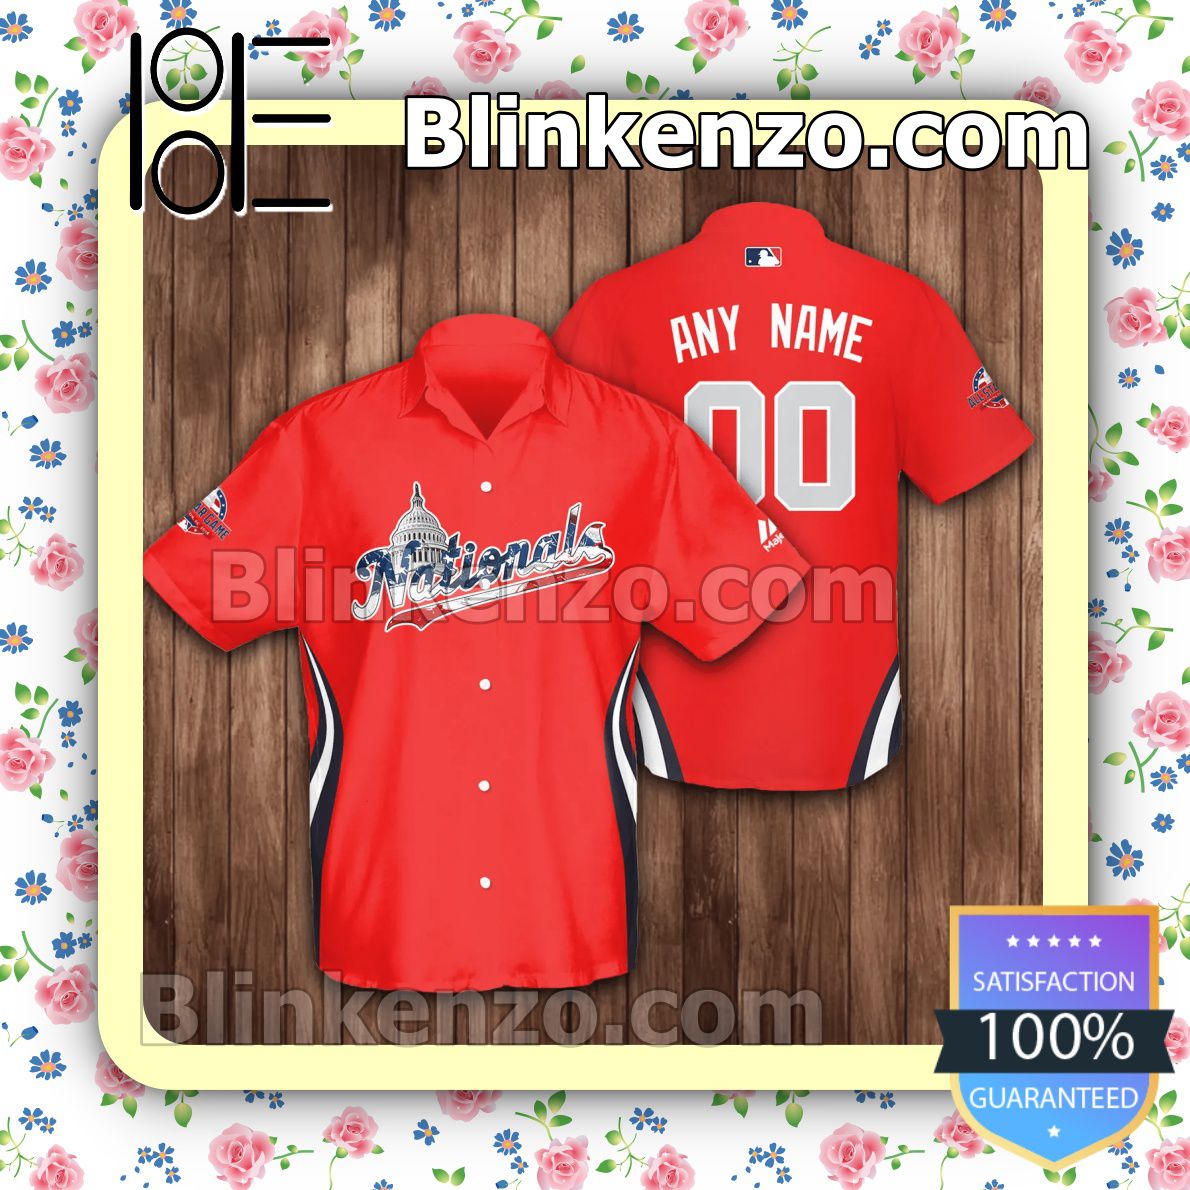 Washington Nationals Personalized Name And Number Baseball Jersey